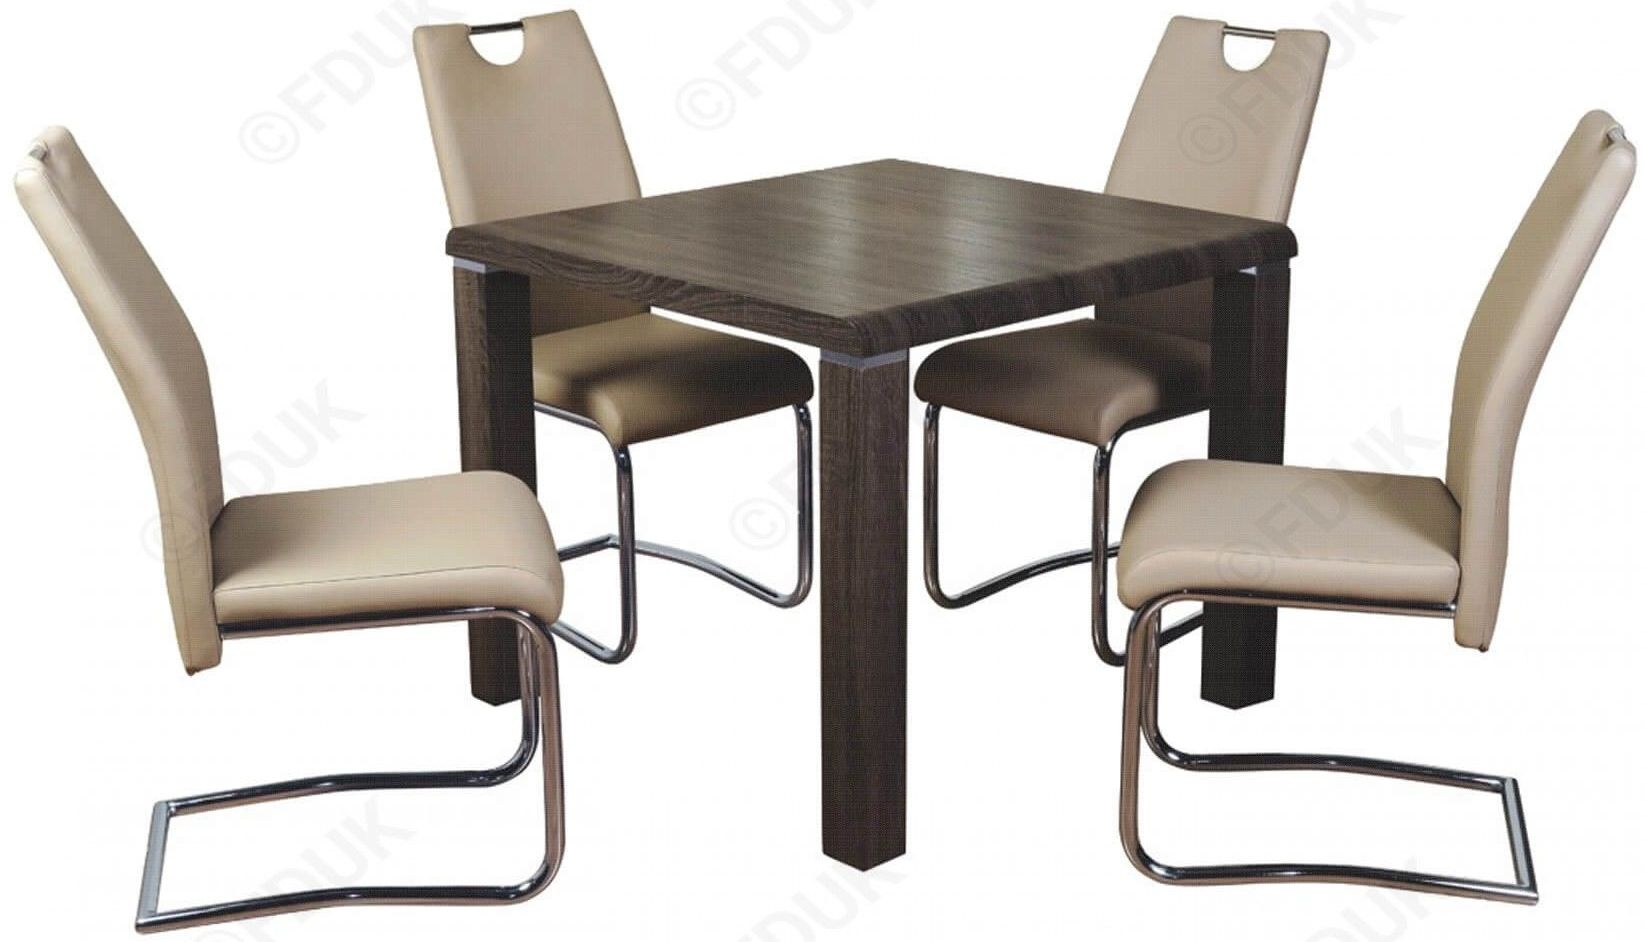 Encore Charcoal 90cm Square Dining Table And 4 Khaki Claren Chairs